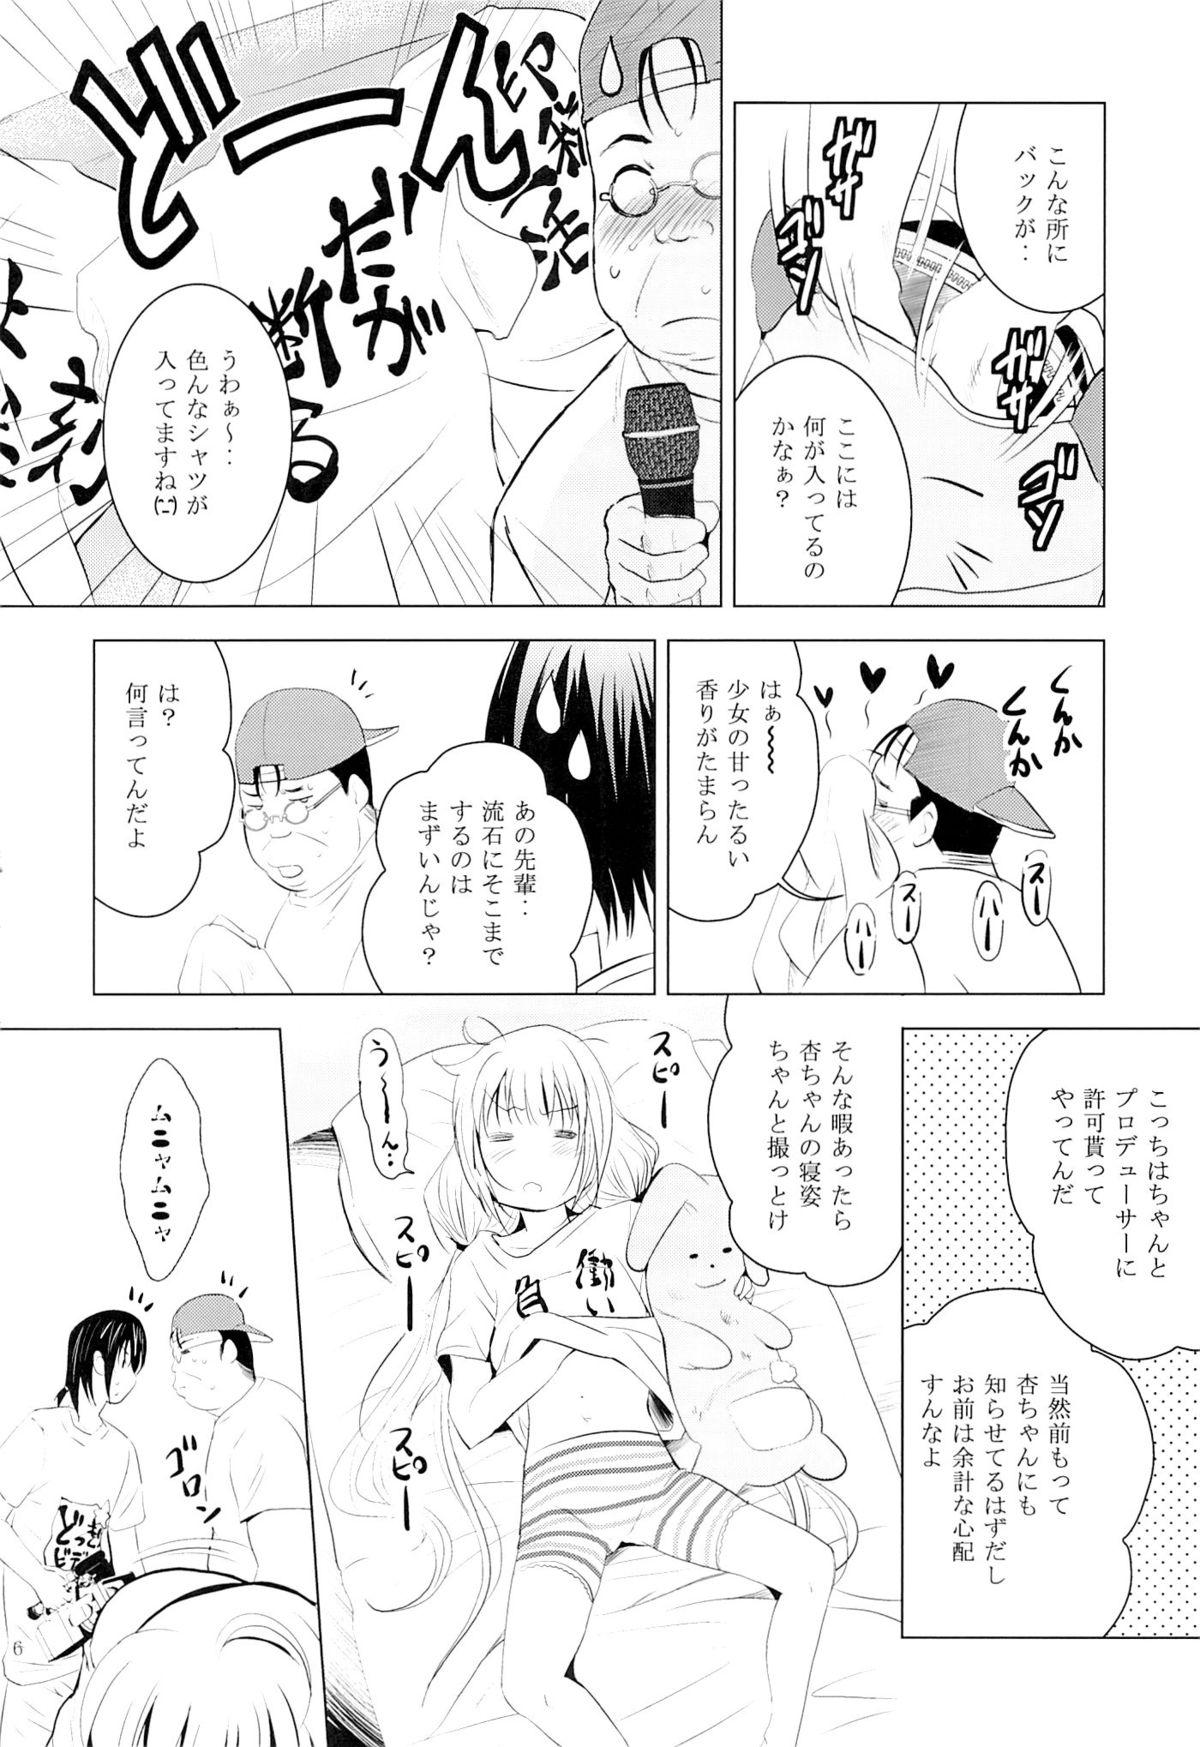 Crazy MOUSOU Mini Theater 37 - The idolmaster Les - Page 5